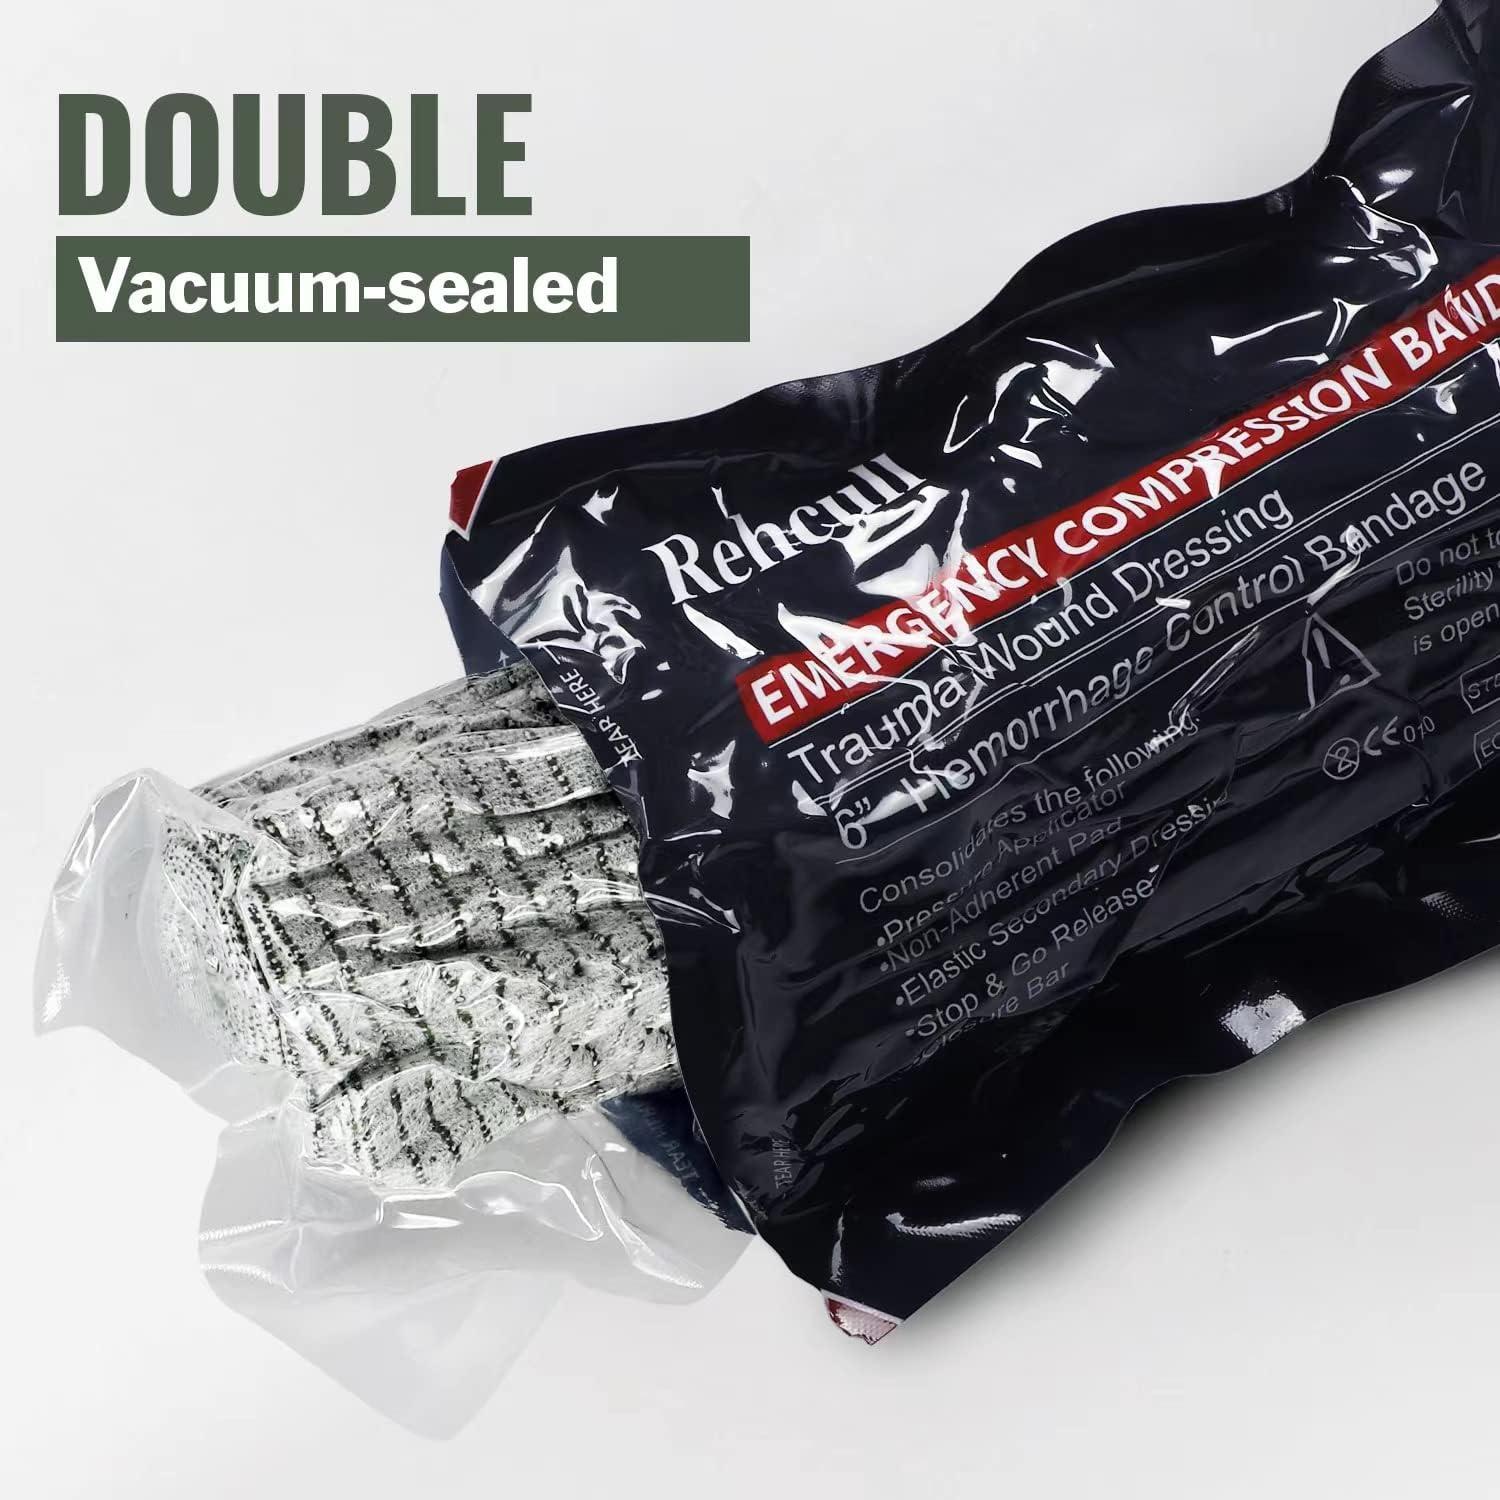 Vacuum-Packed IFAK and Blow-Out Trauma Kits